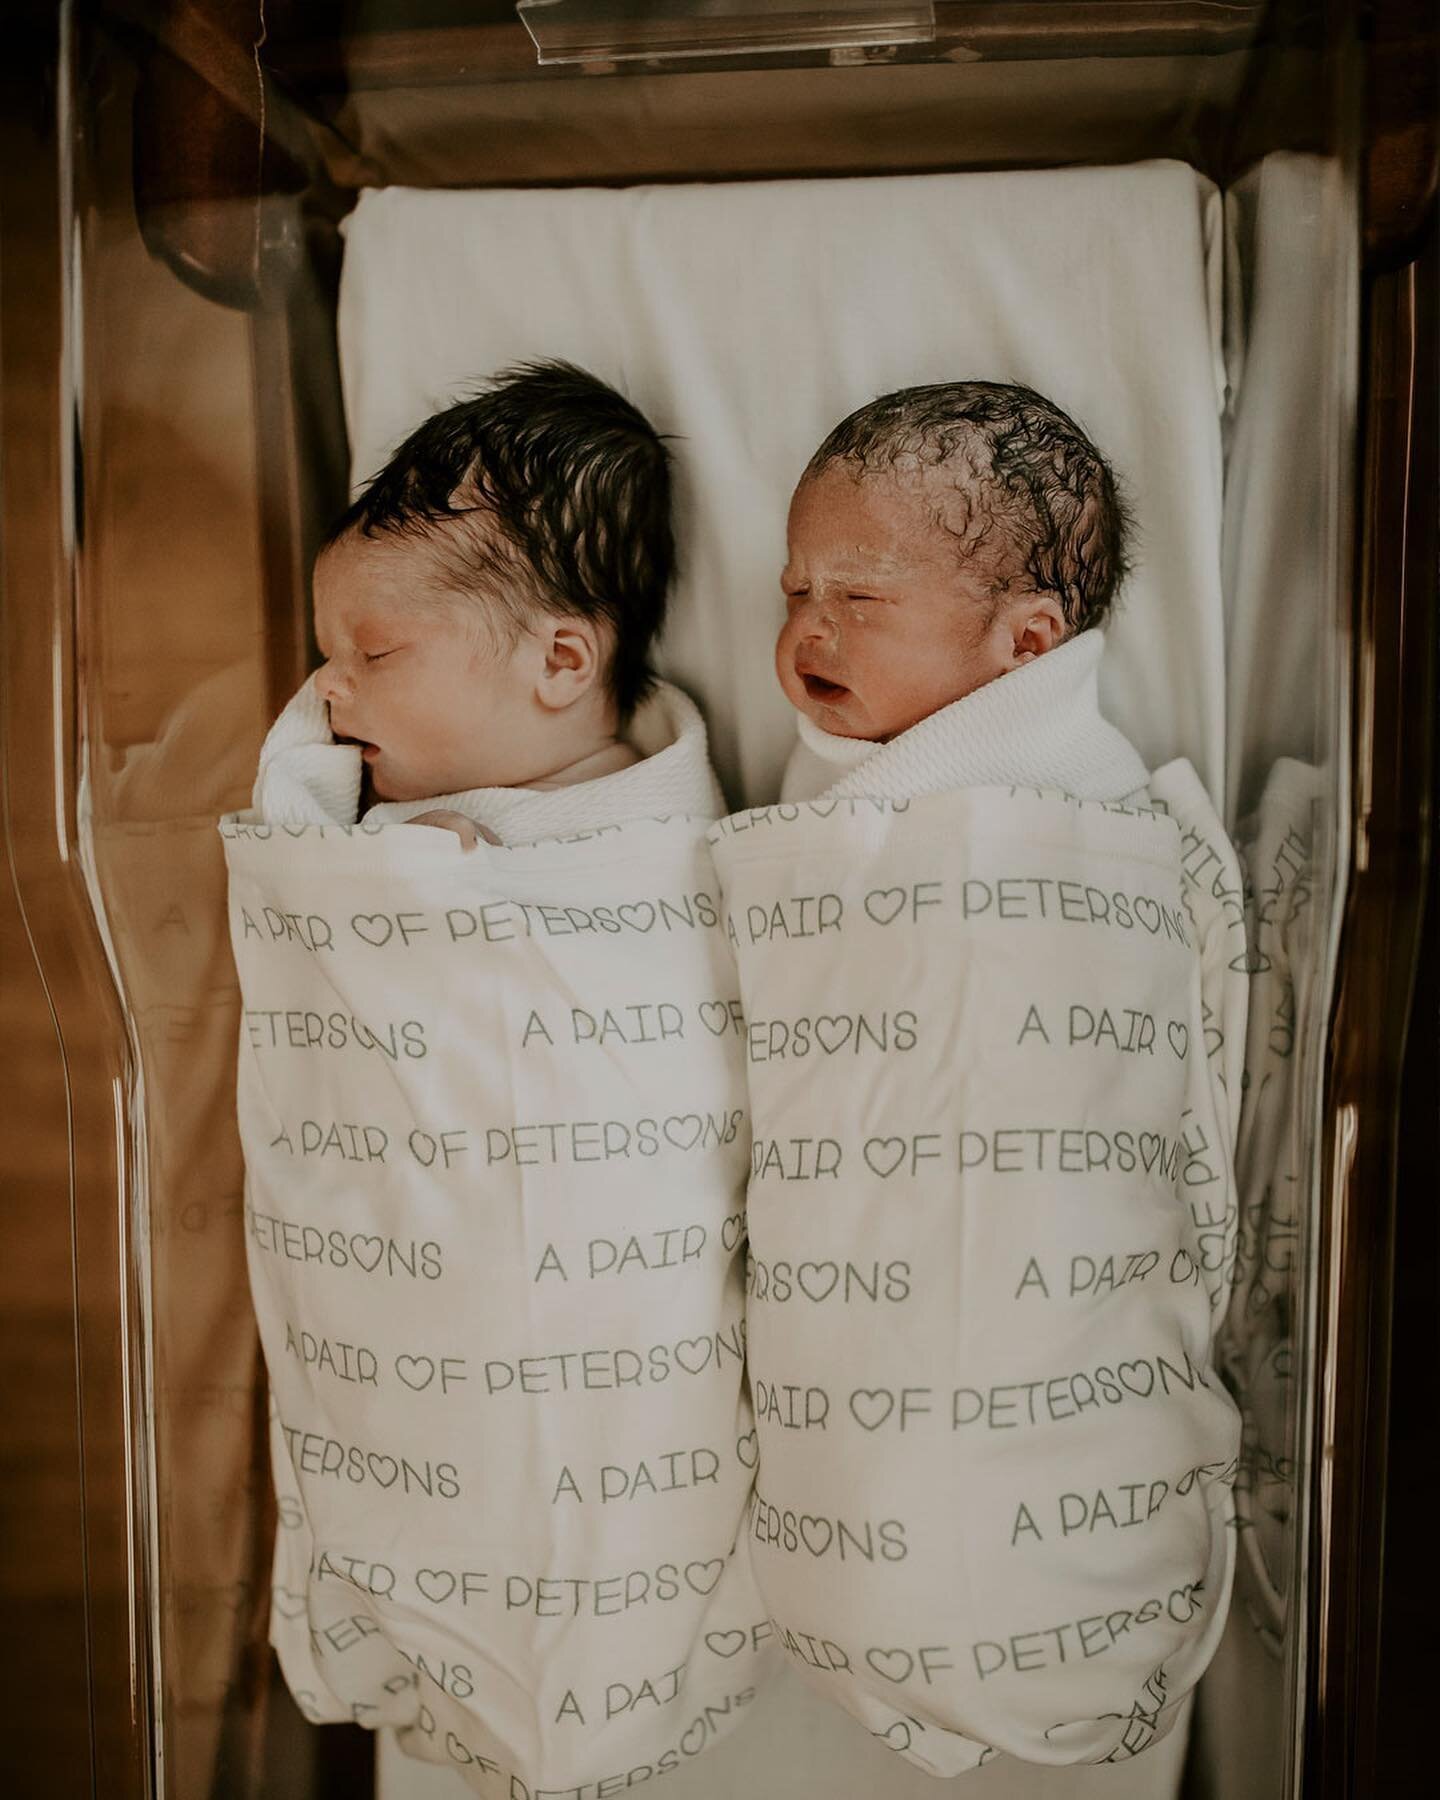 A year ago. Wow! I&rsquo;ve been meaning to share this birth story and was shocked to see a whole year has passed. There&rsquo;s so much to say...
First off, these beautiful twins were born on the morning of my trip to London. I left the hospital at 